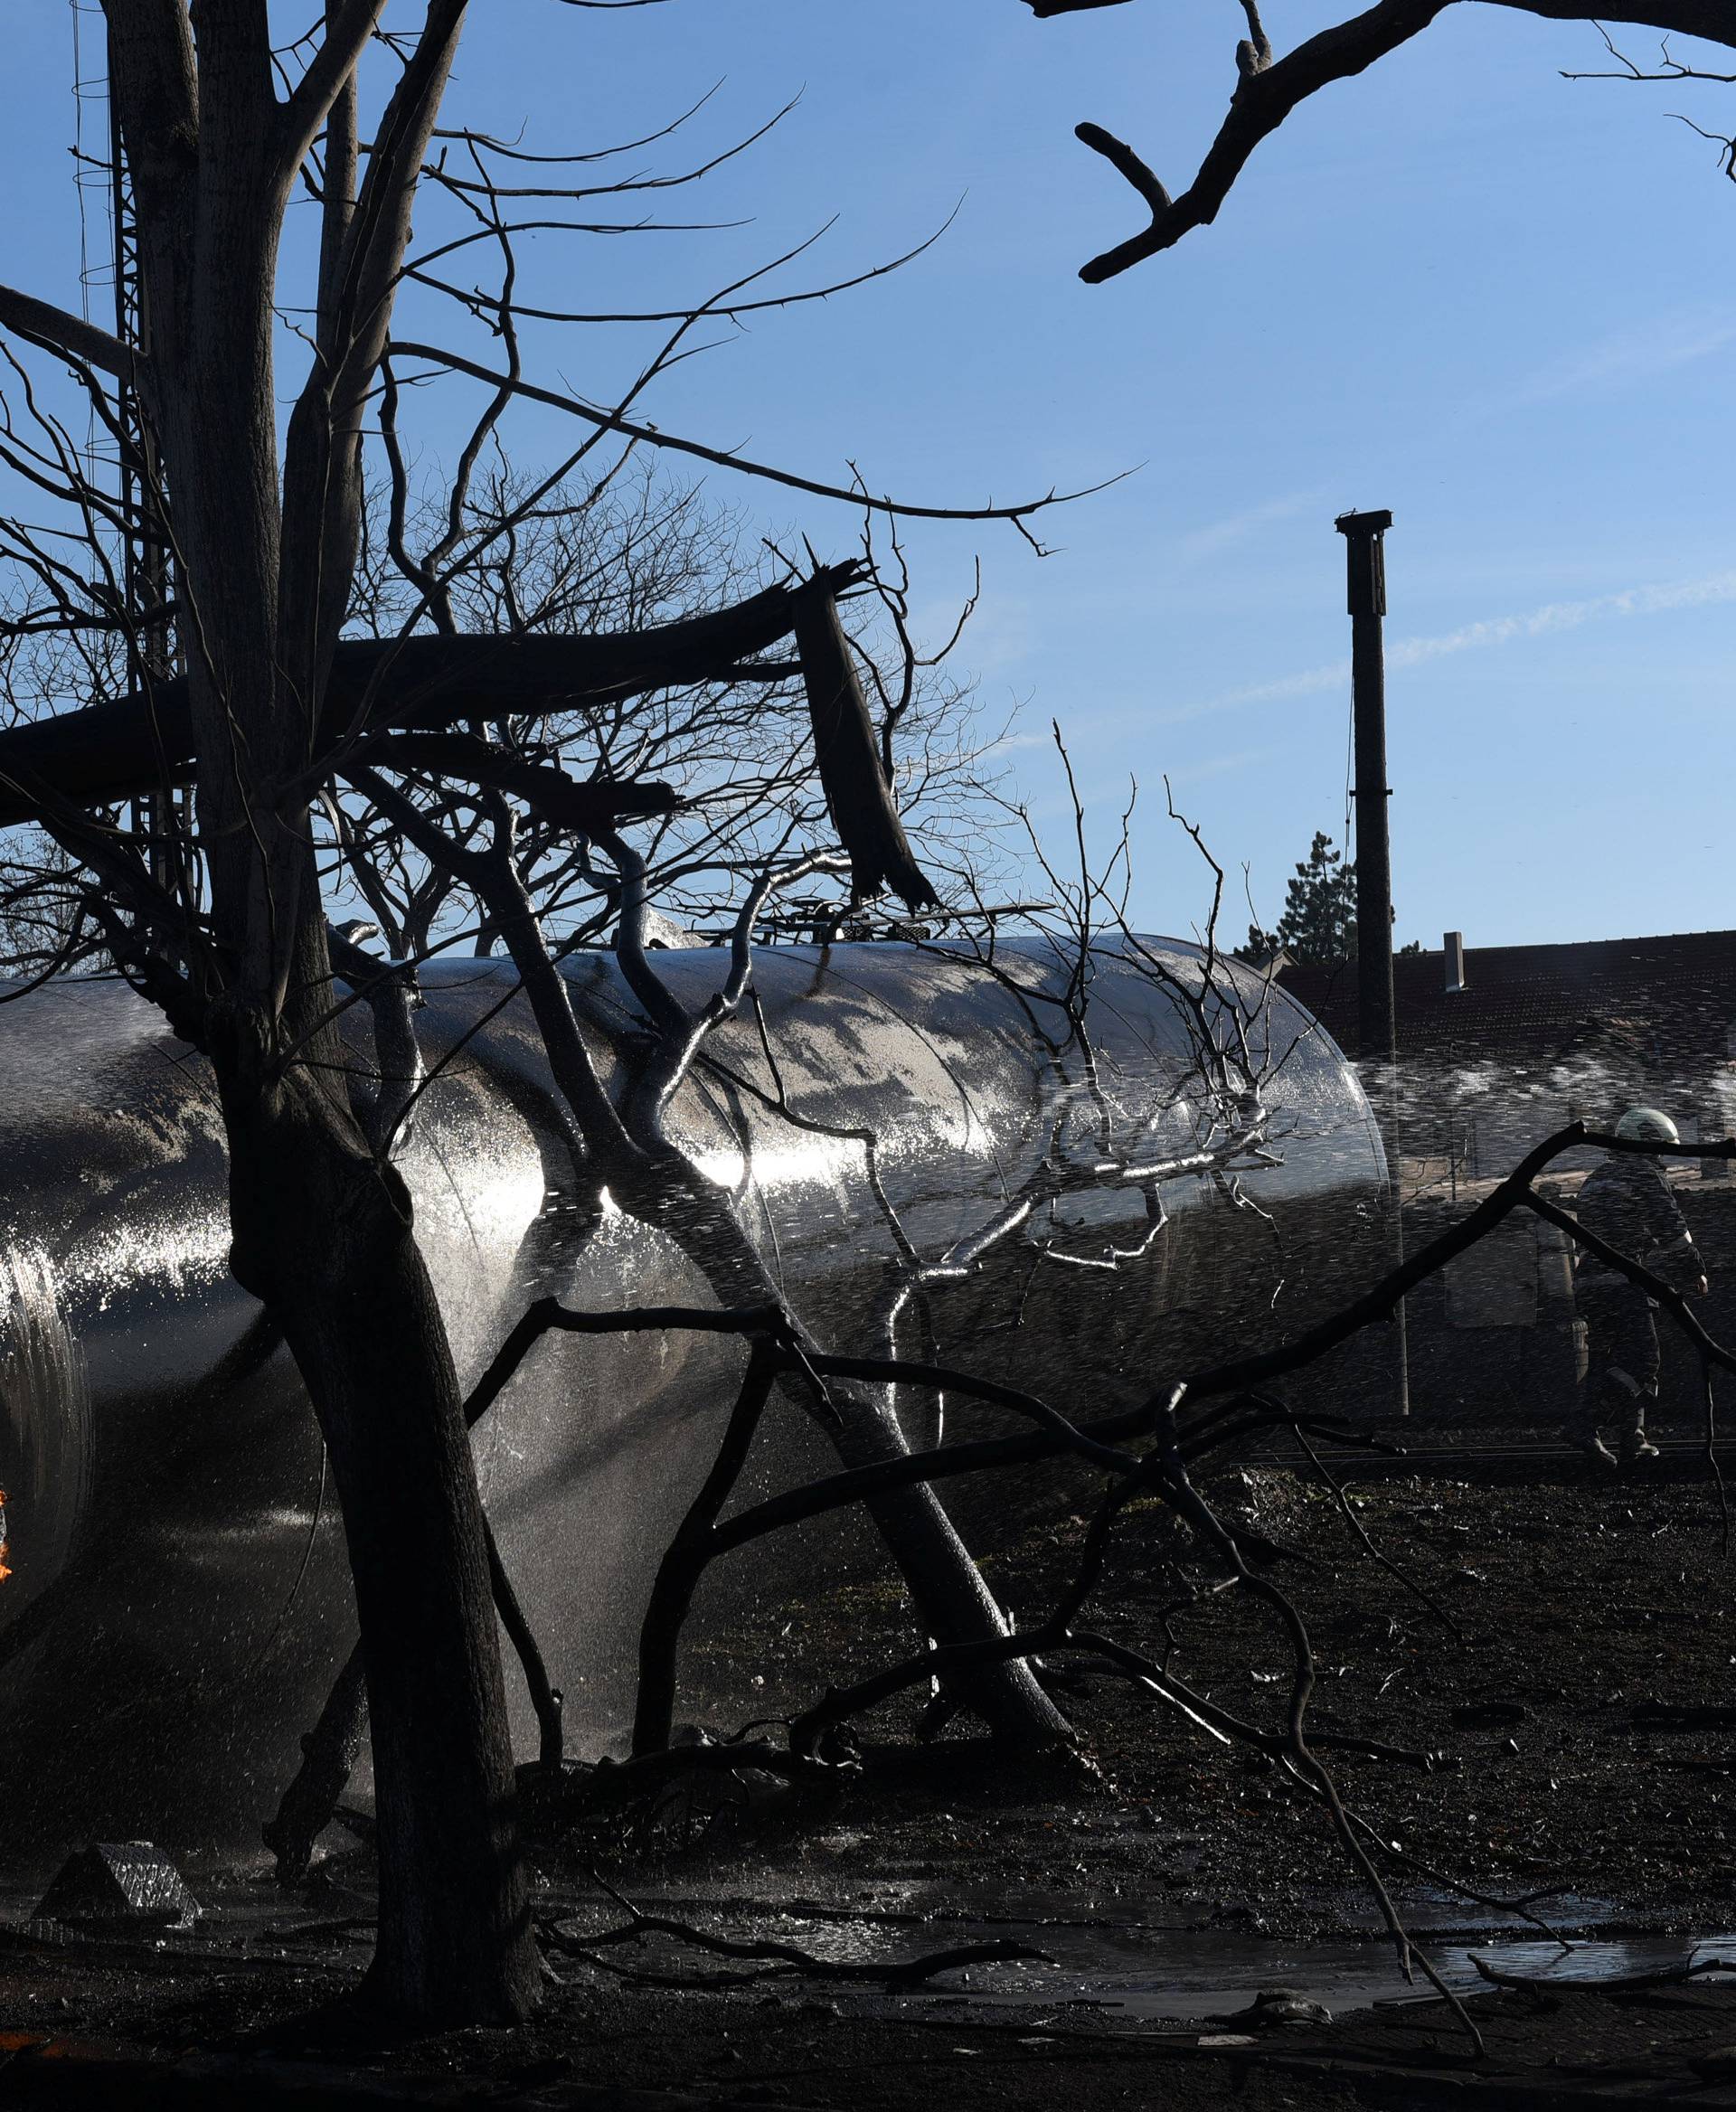 Firefighters work on the site where a cargo train derailed and exploded in the village of Hitrino